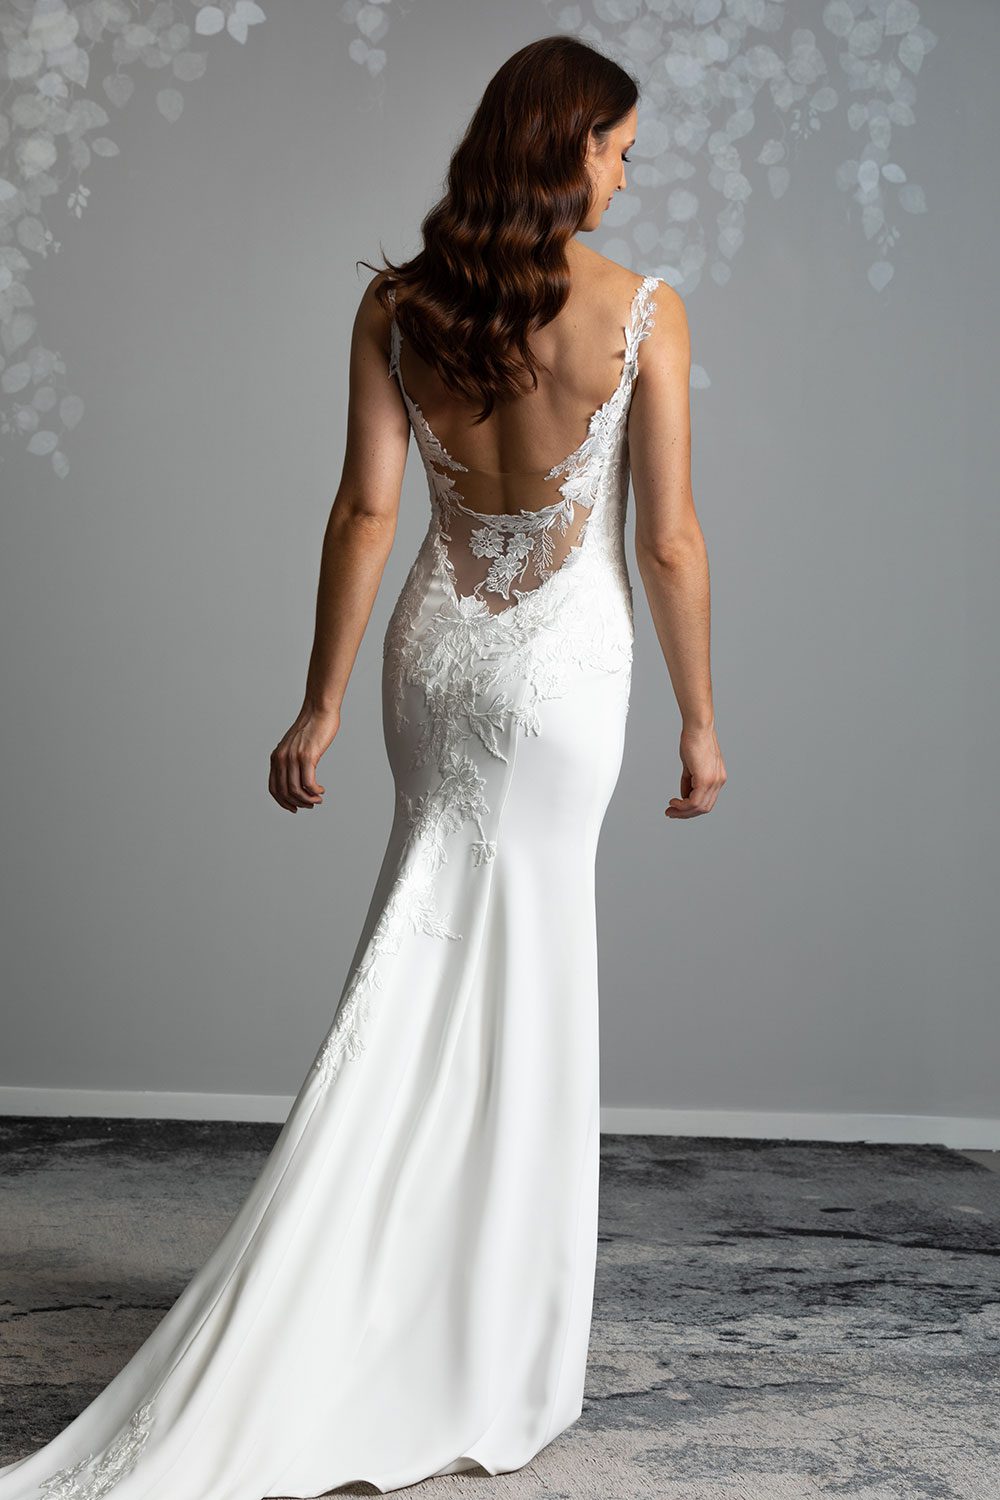 Ana Wedding gown from Vinka Design - This beautiful gown is graced by hand-appliqued delicate floral leaf lace, subtly worked into the front of the bodice and more prominently on the back. A fit-and-flare cut. Model revealing the low back of the gown with intricate lace on illusion tulle